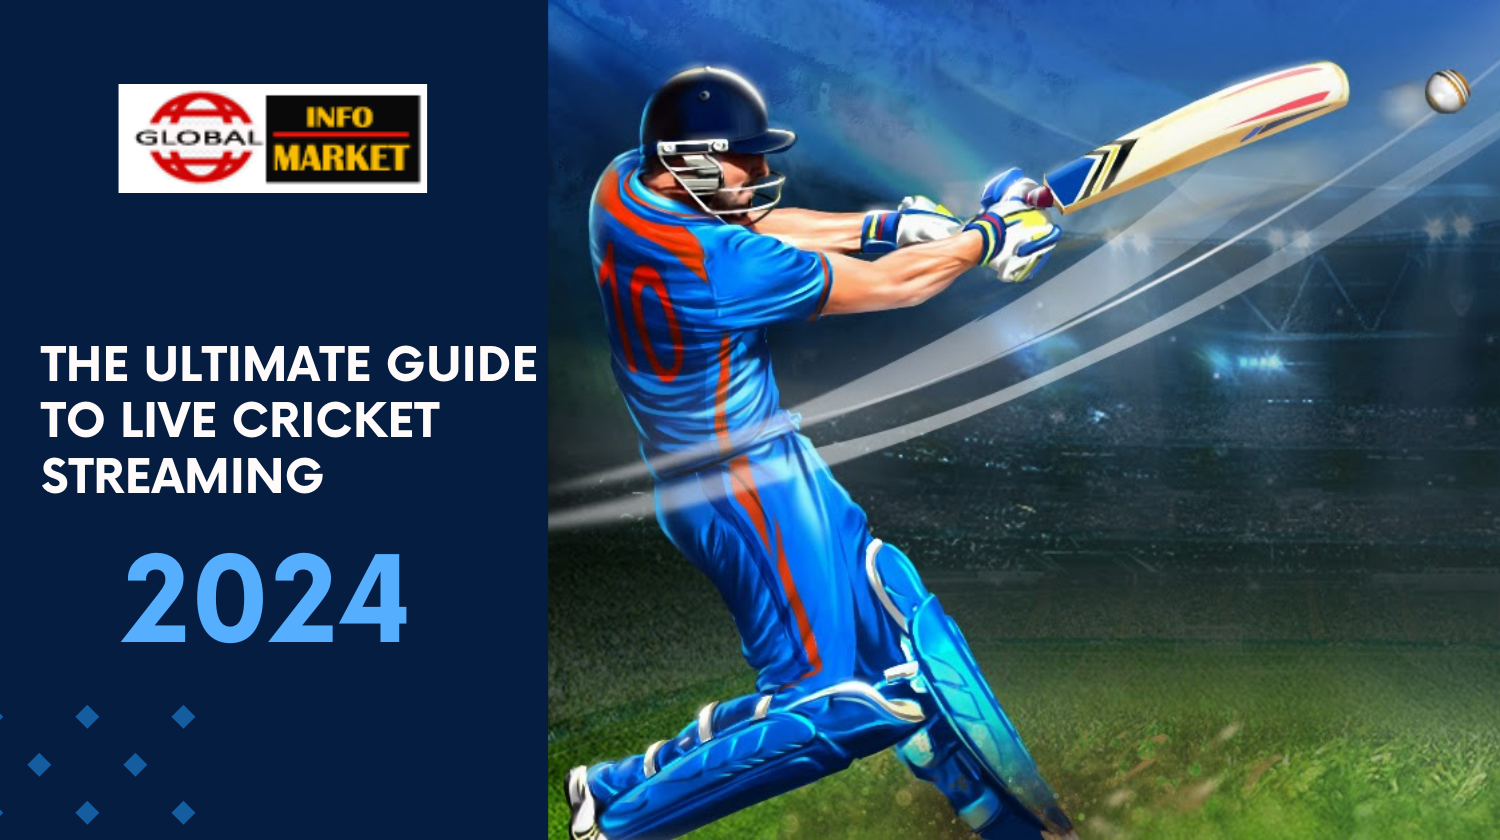 Catch Every Ball Live: The Ultimate Guide to Live Cricket Streaming (2024)